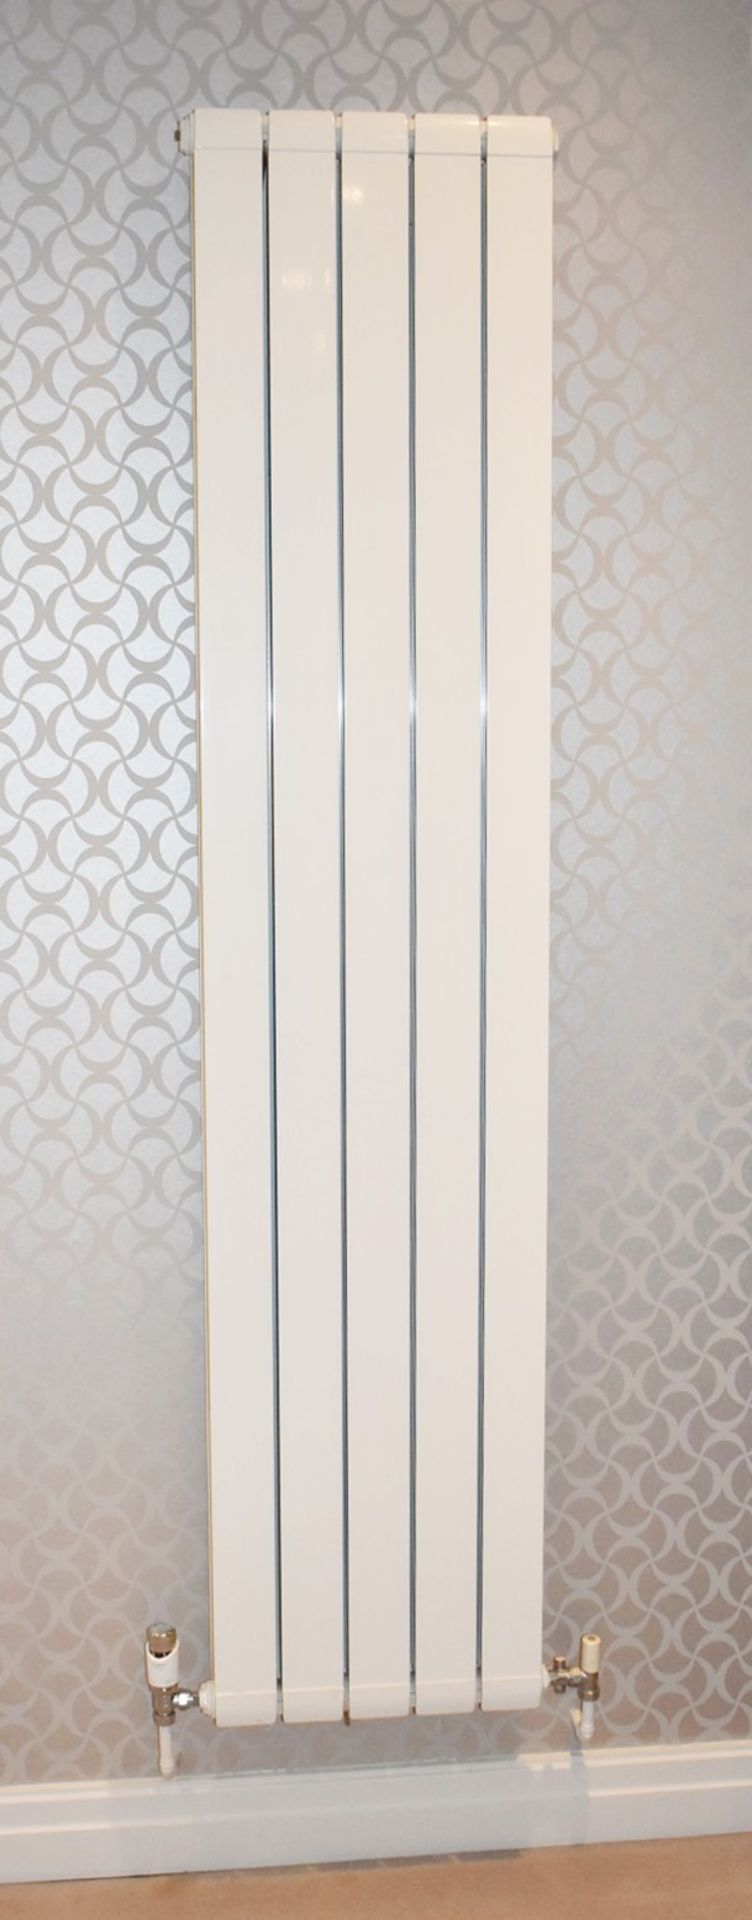 4 x Single Panel Vertical Wall Mounted Radiators - Ref: RR10 / LNG - CL781 - Location: Hale Barns - Image 3 of 8